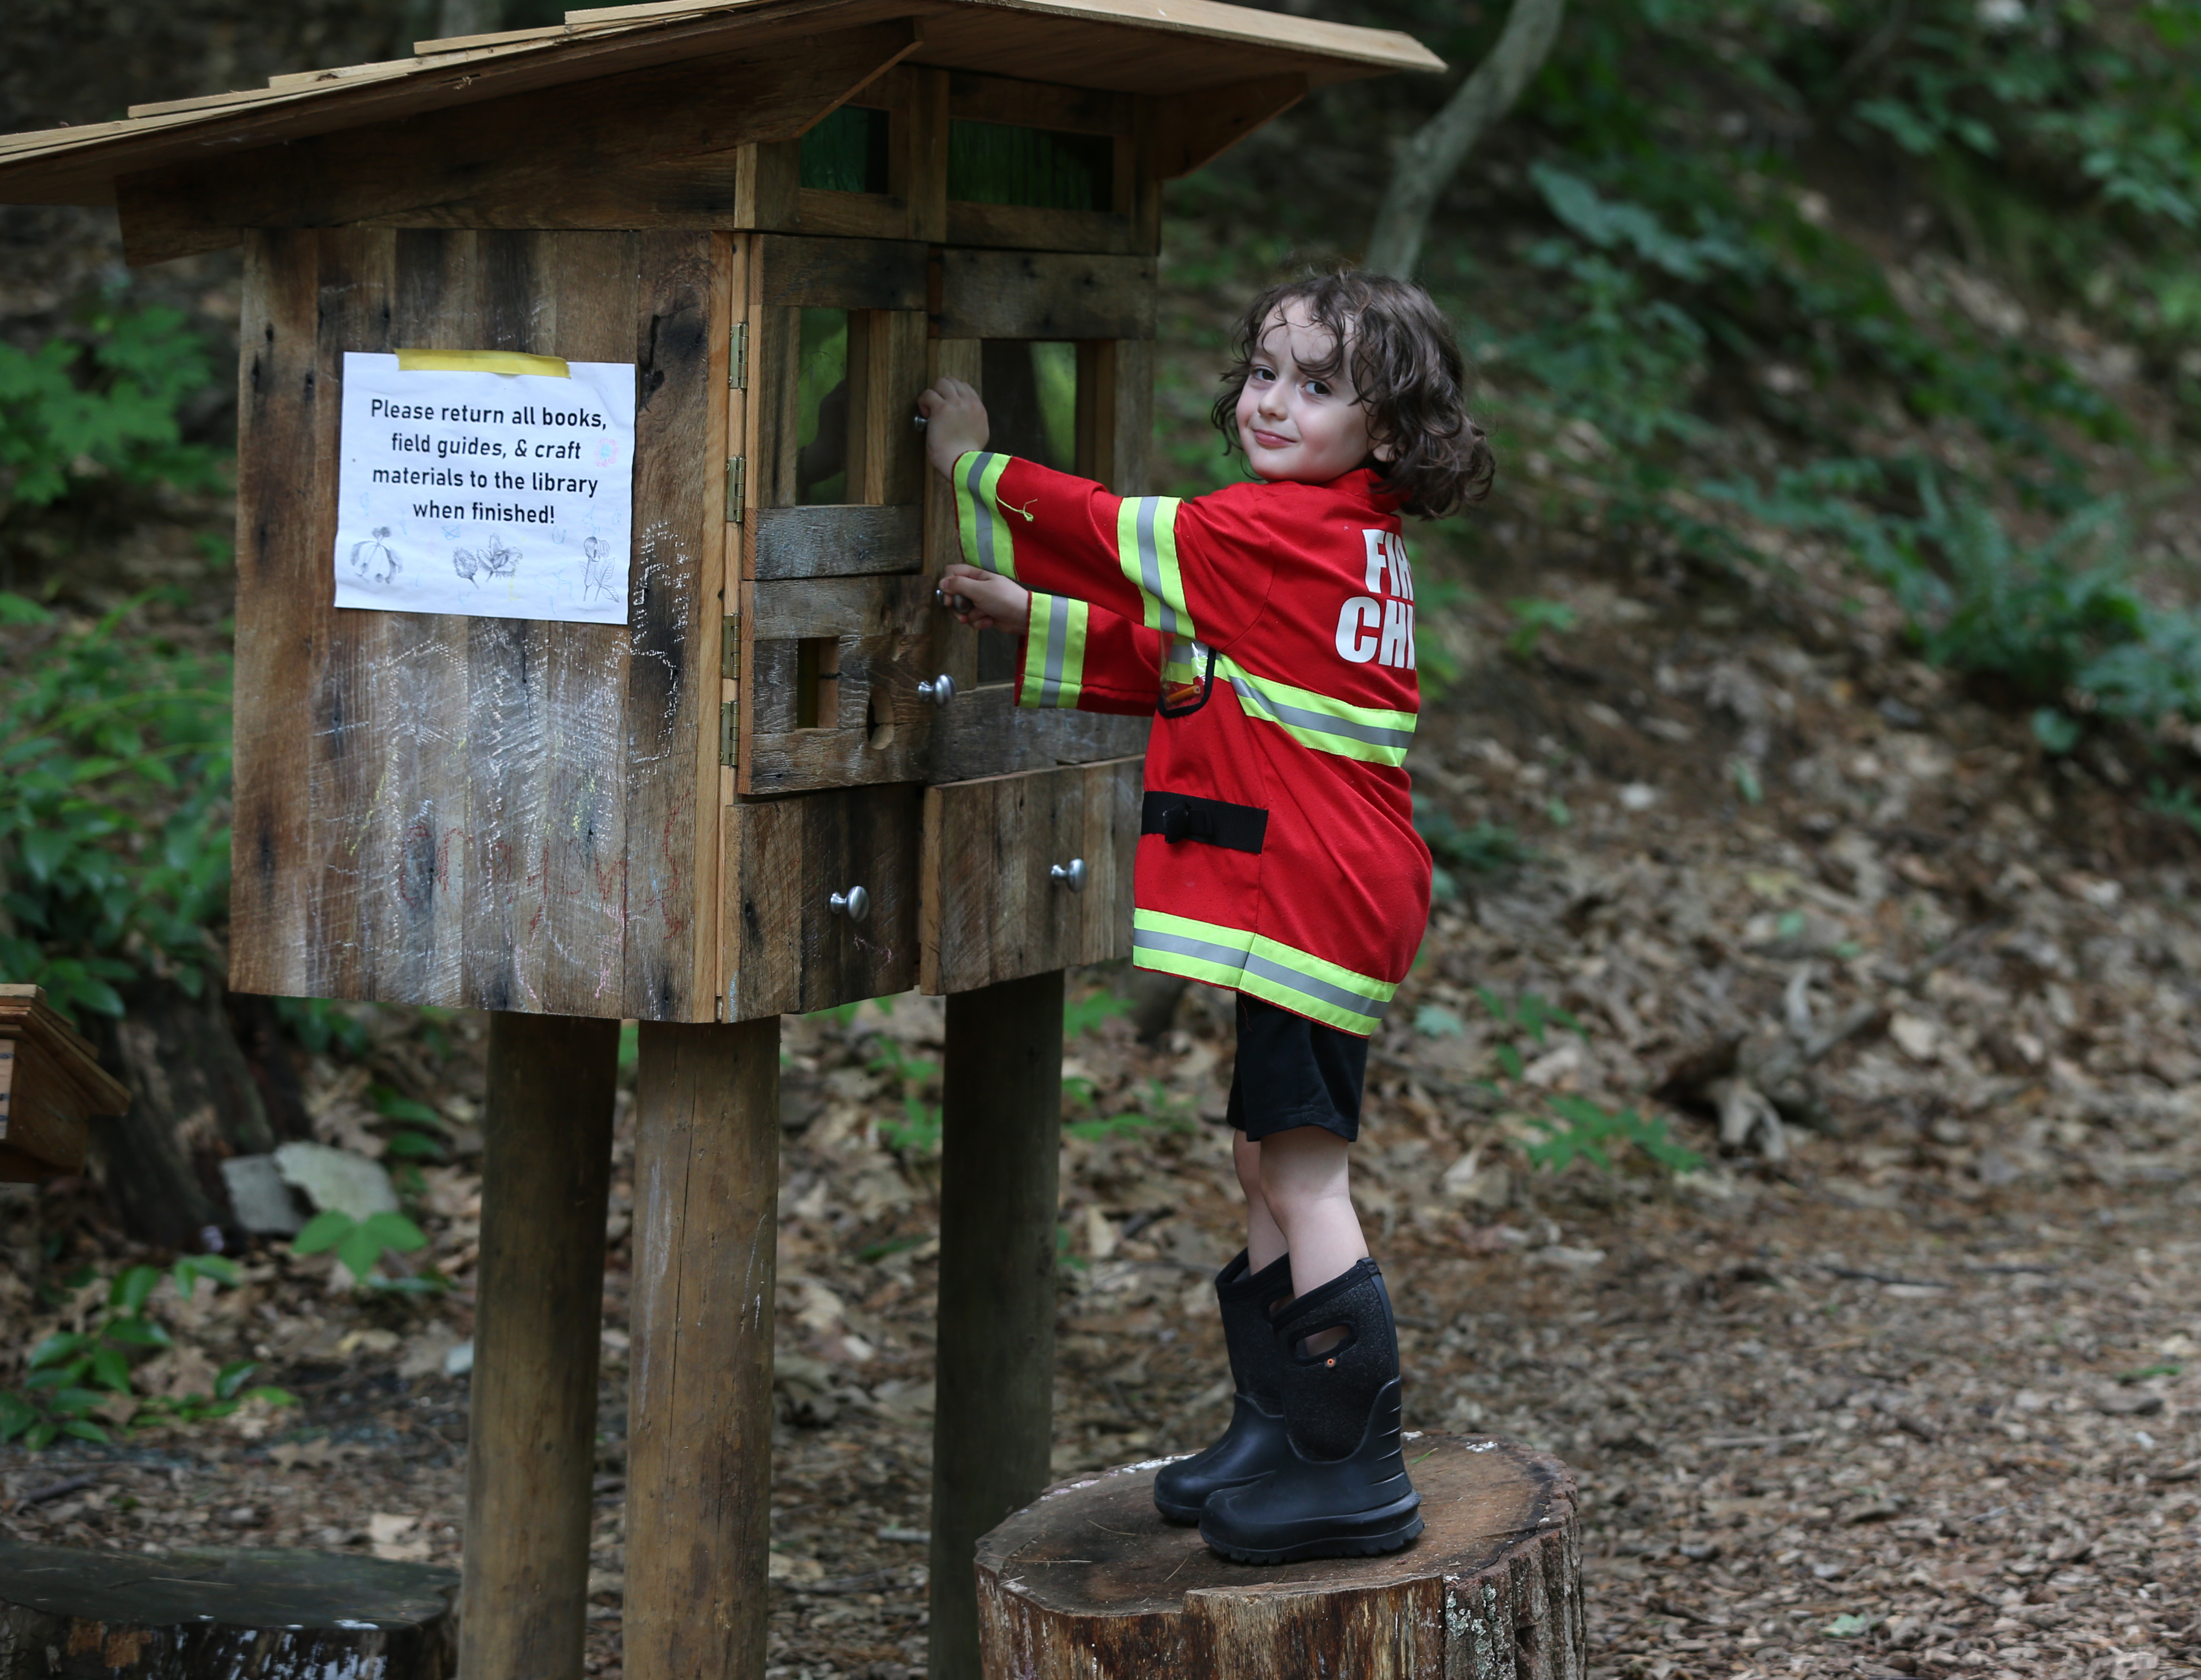 Griffin Barber, 4, during a visit to Garden in the Woods in Framingham.